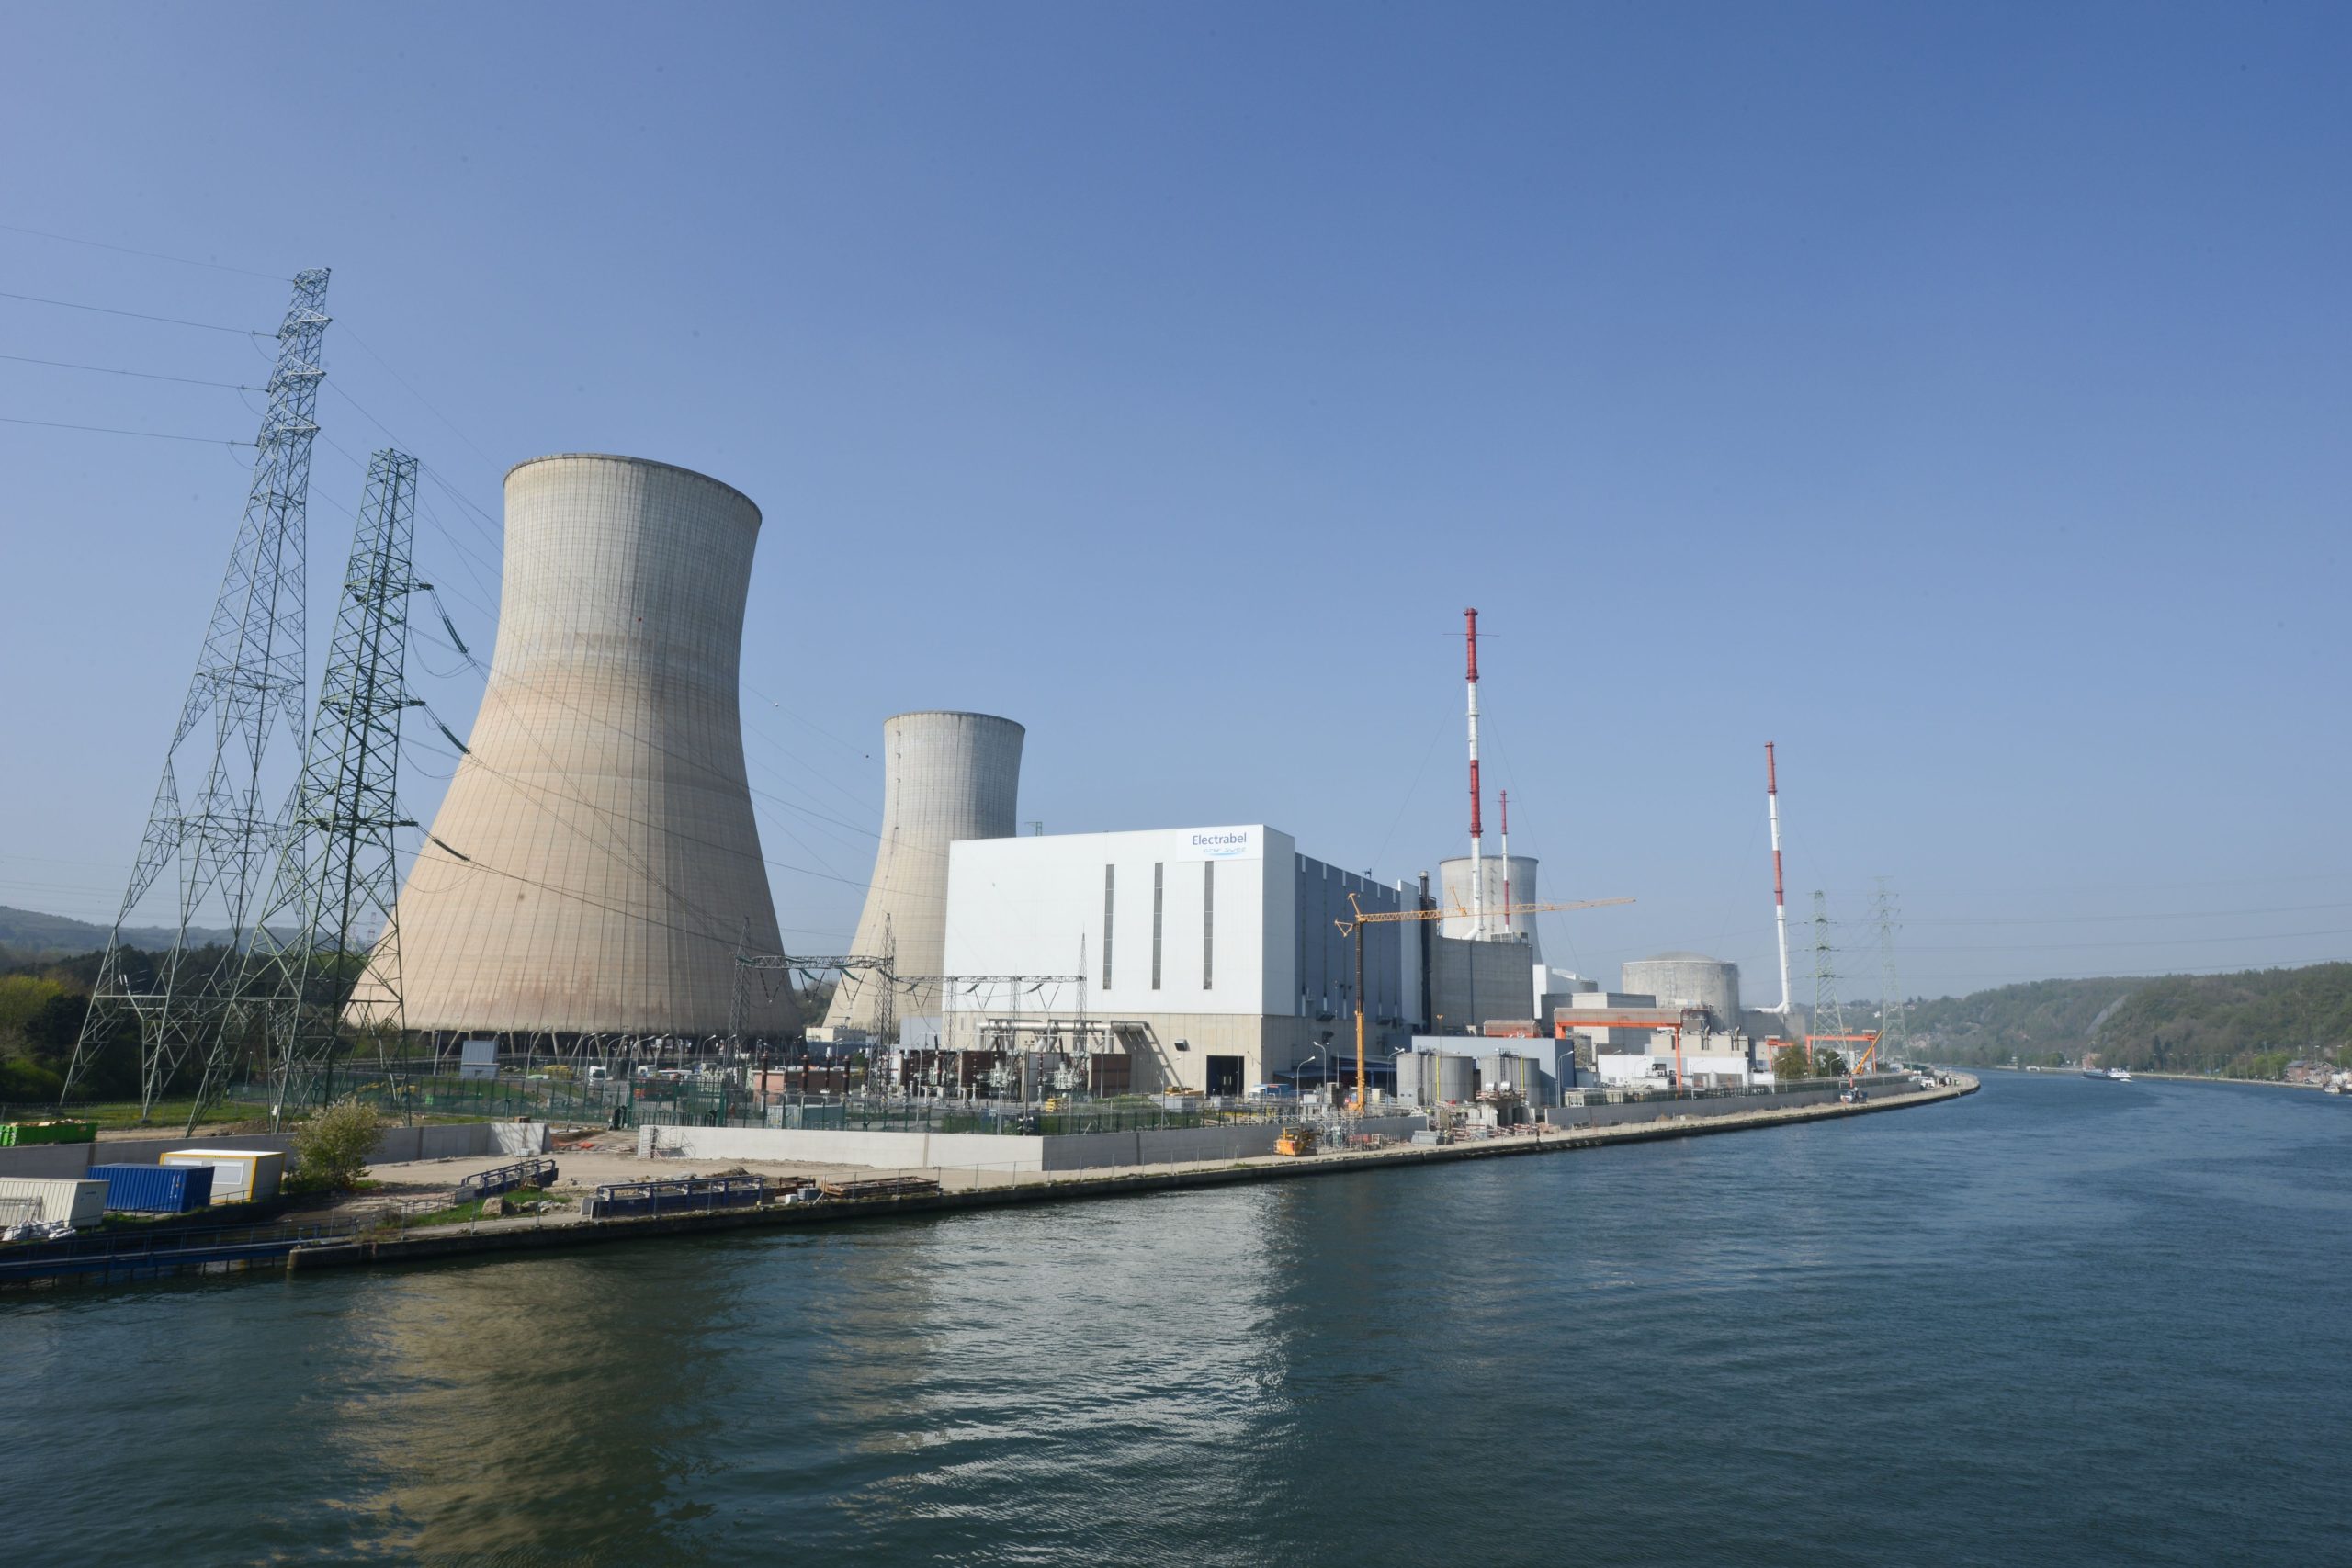 Agreement on limiting post-nuclear energy bill